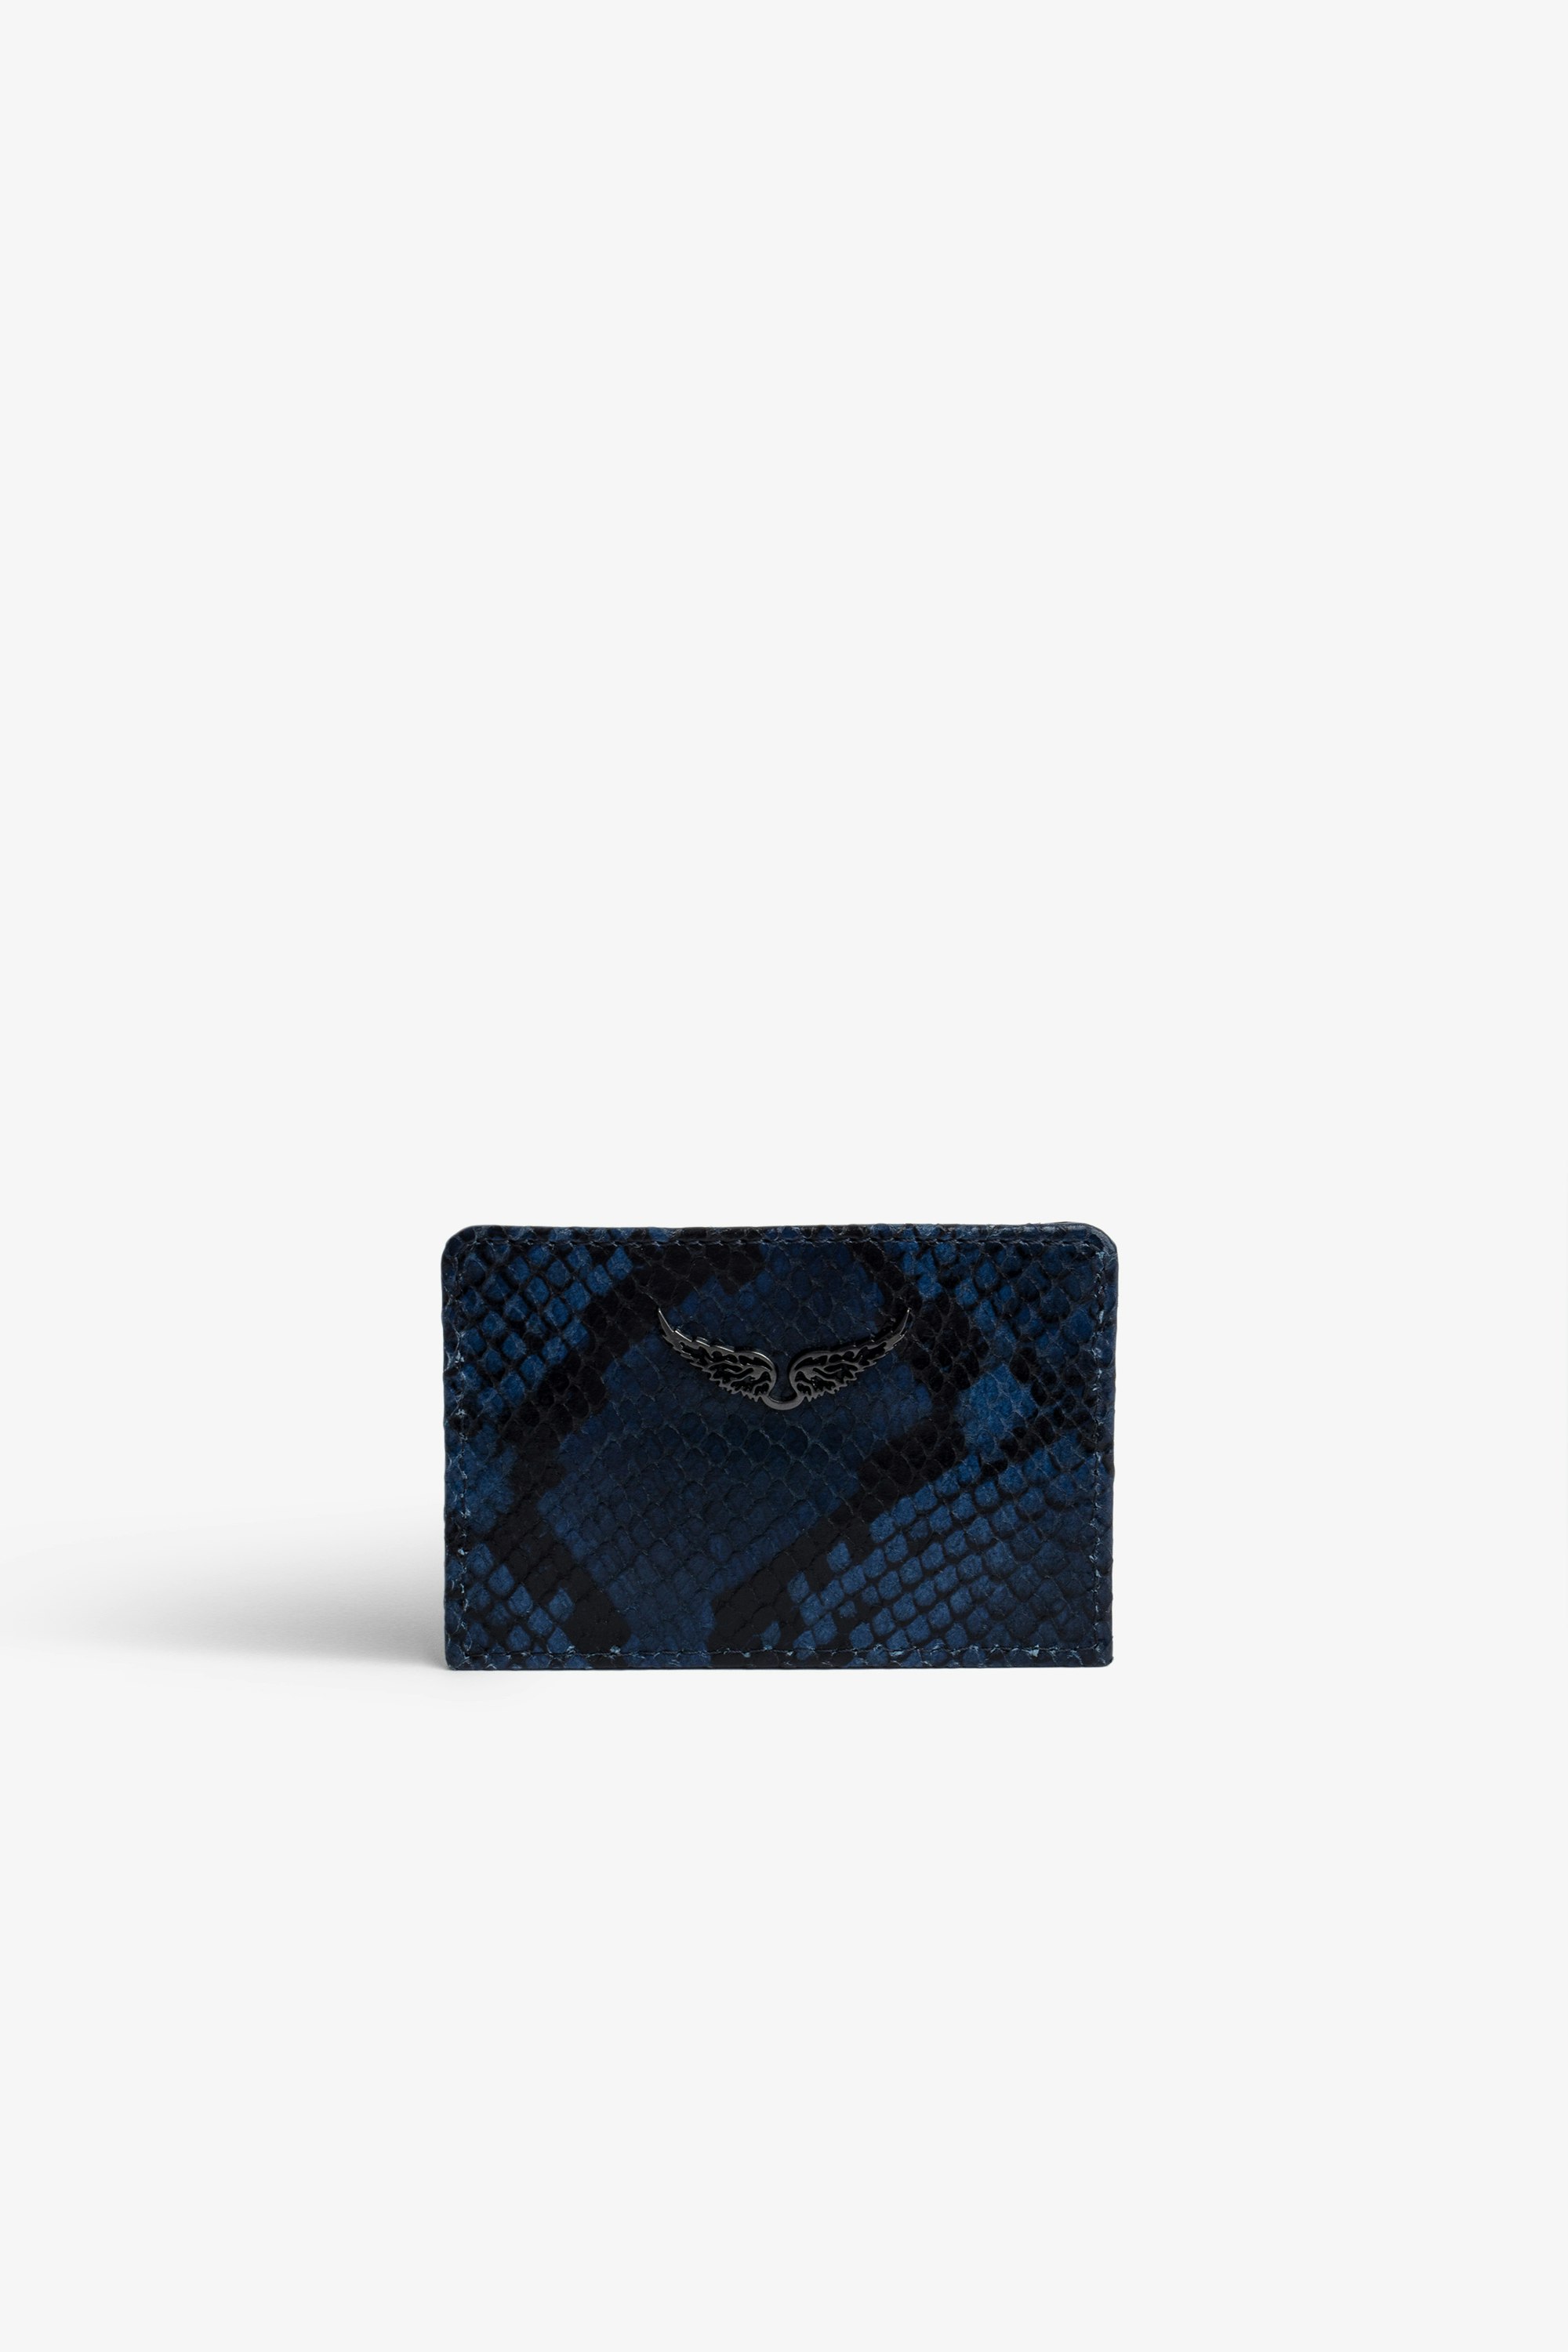 ZV Pass Card Holder Women’s card holder in black and blue python-effect leather